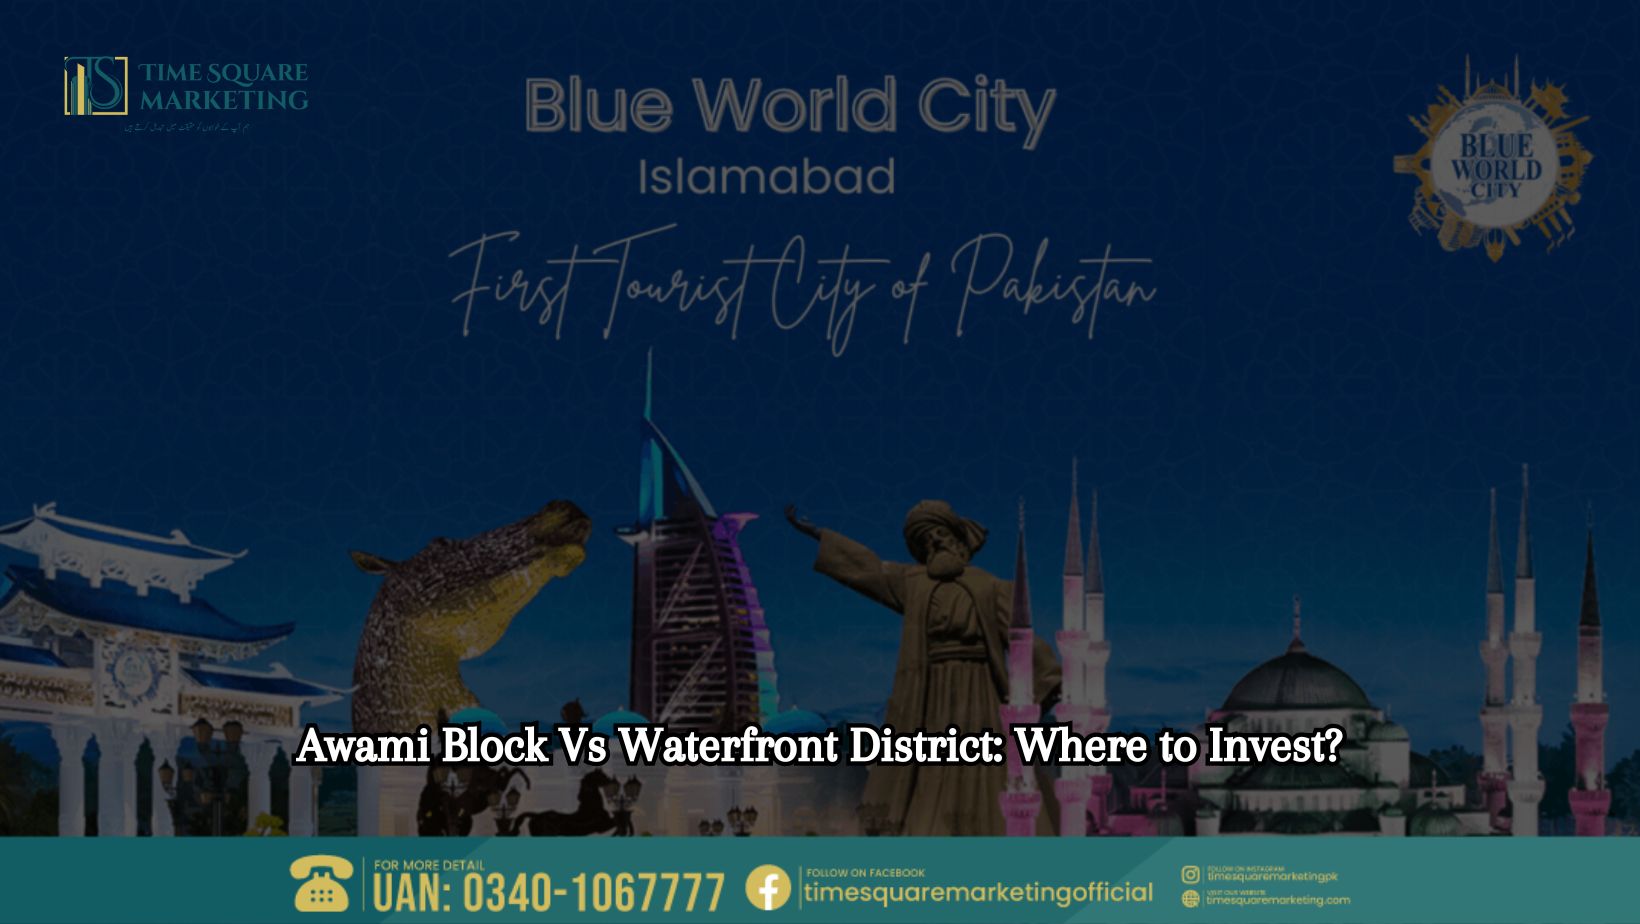 Awami Block Vs Waterfront District Where to Invest